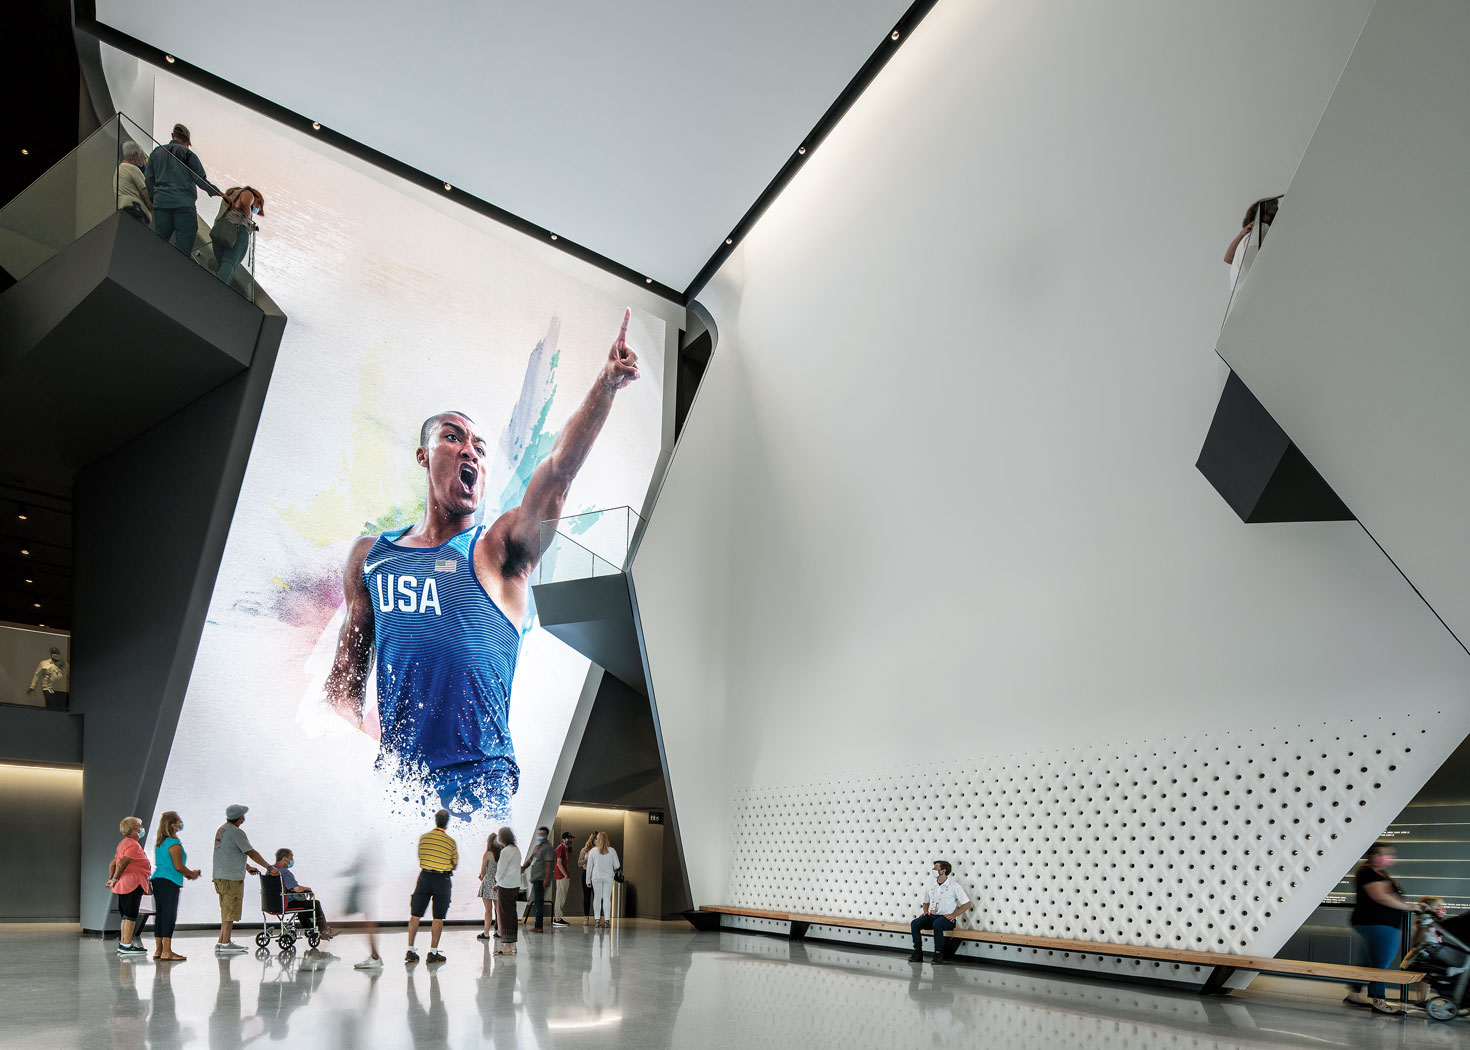 A large museum hall with a picture of an athlete on the wall.